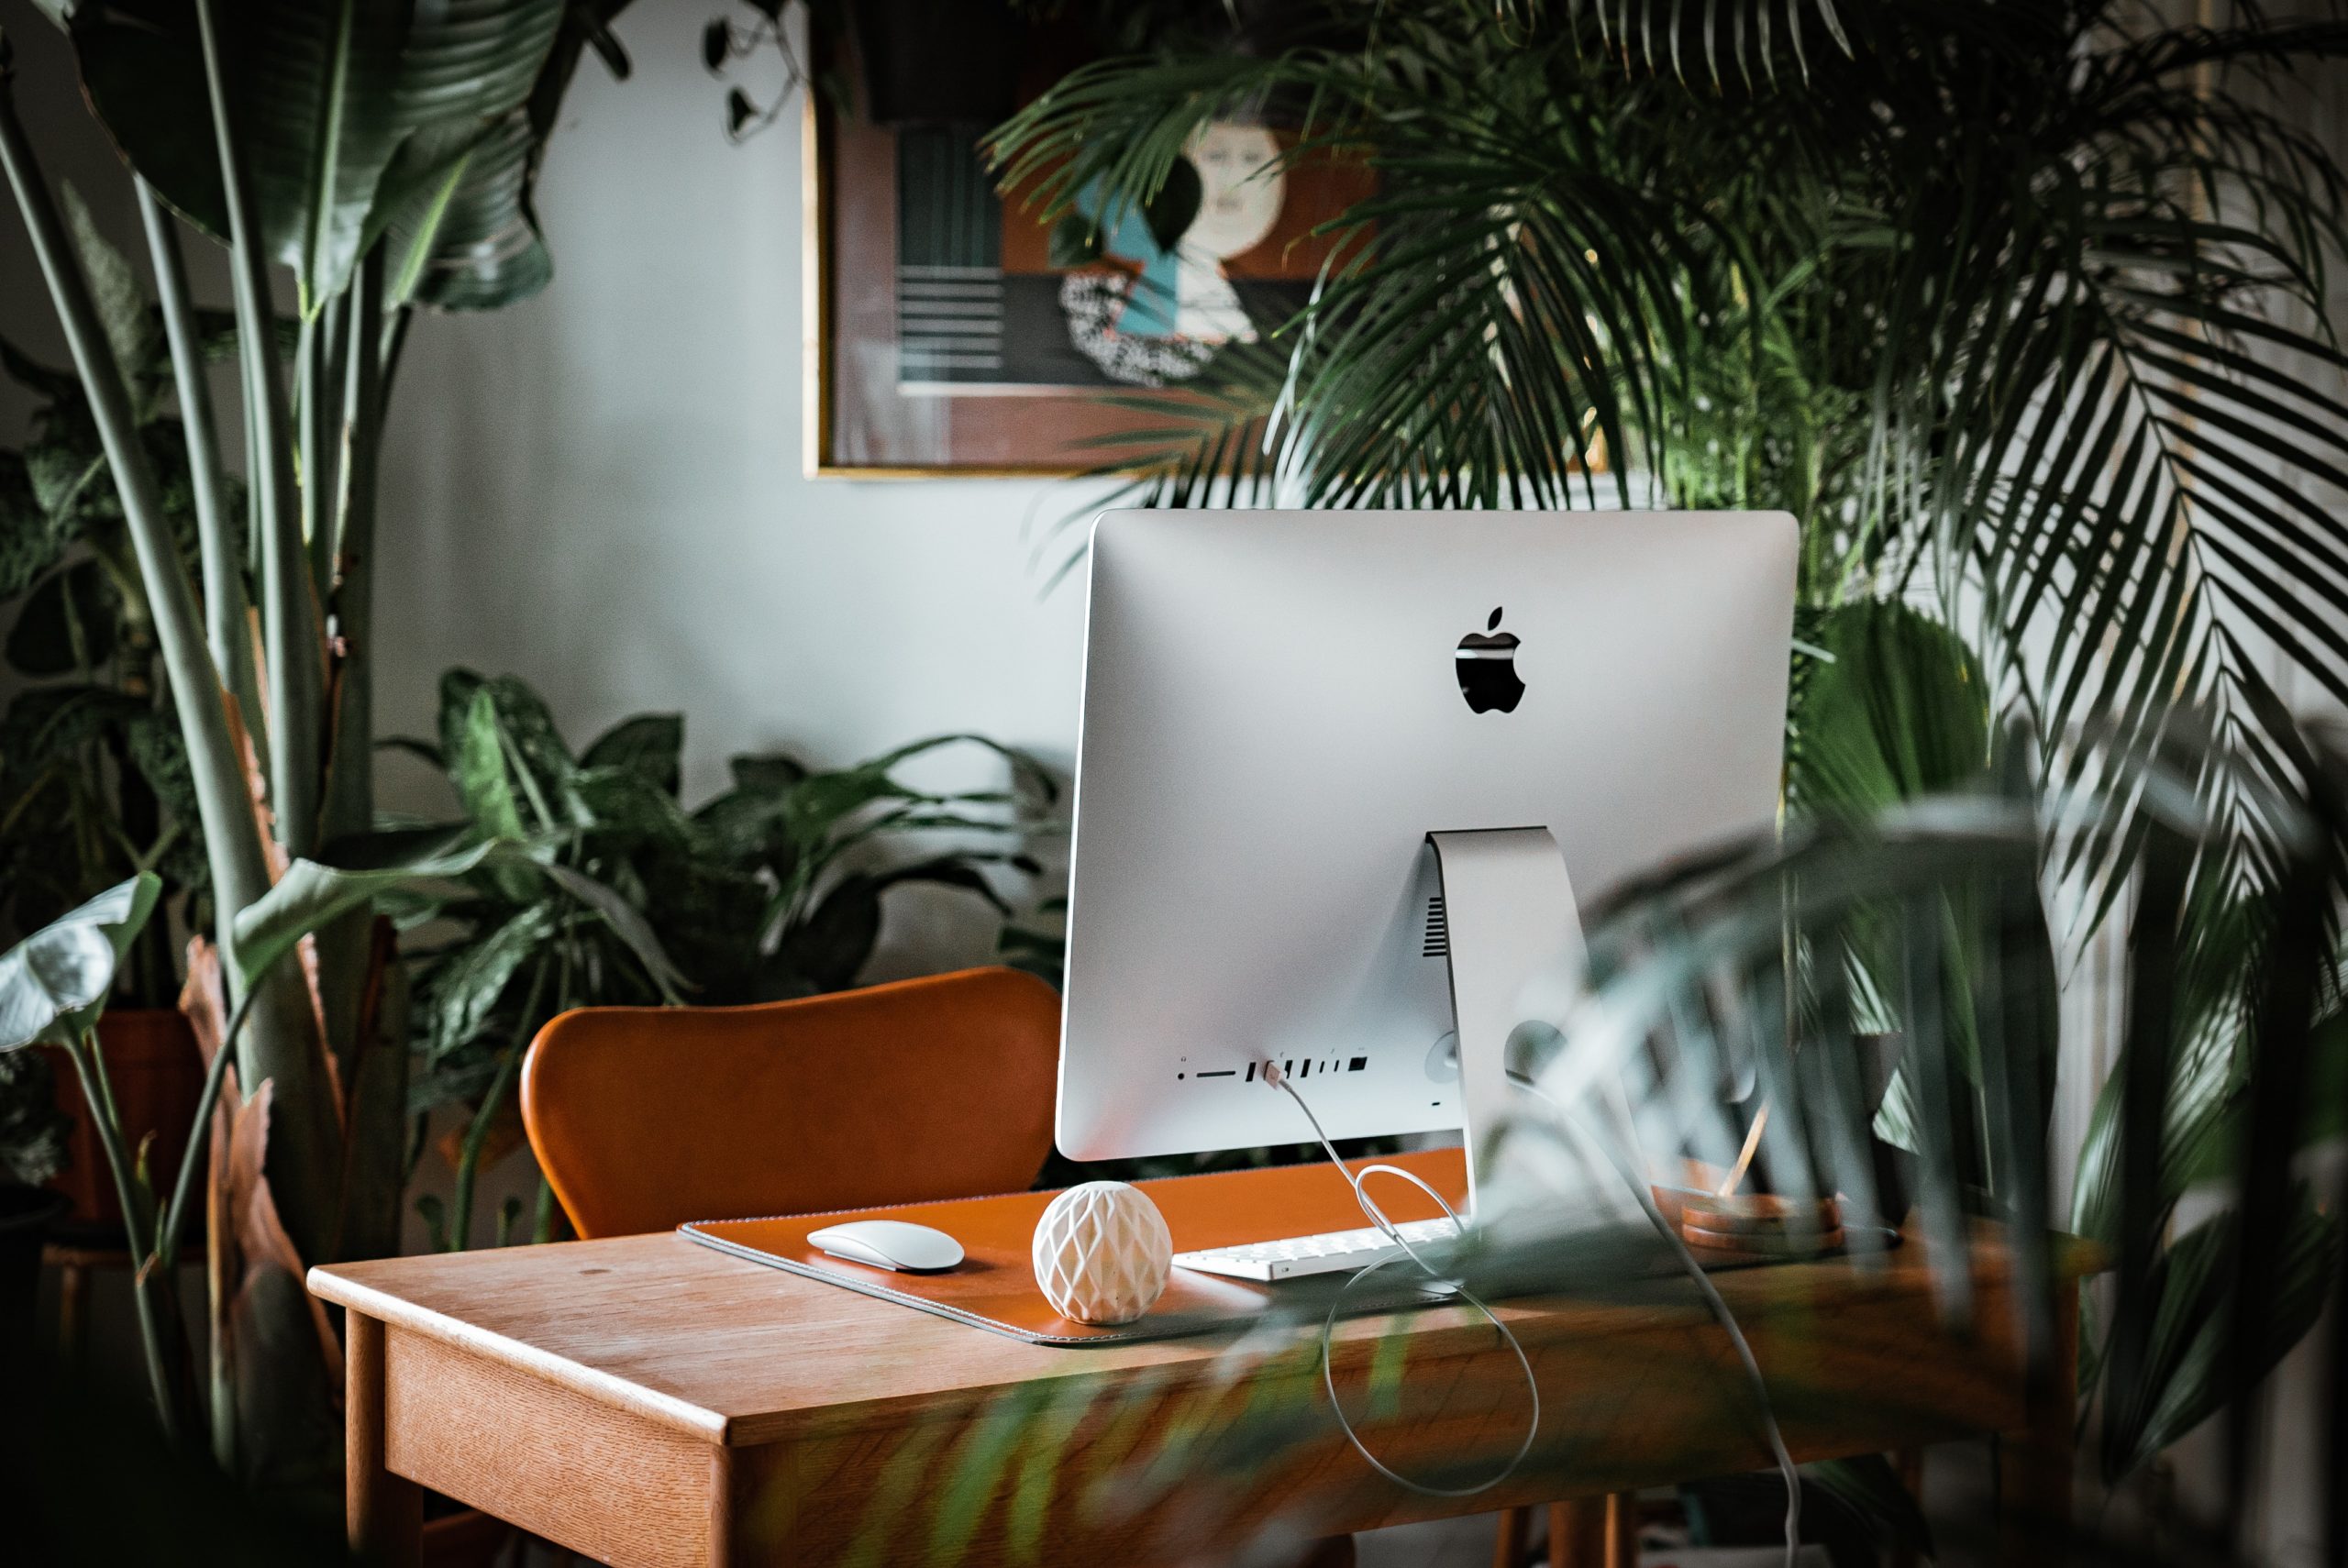 Do Plants Really Improve Your Workspace?